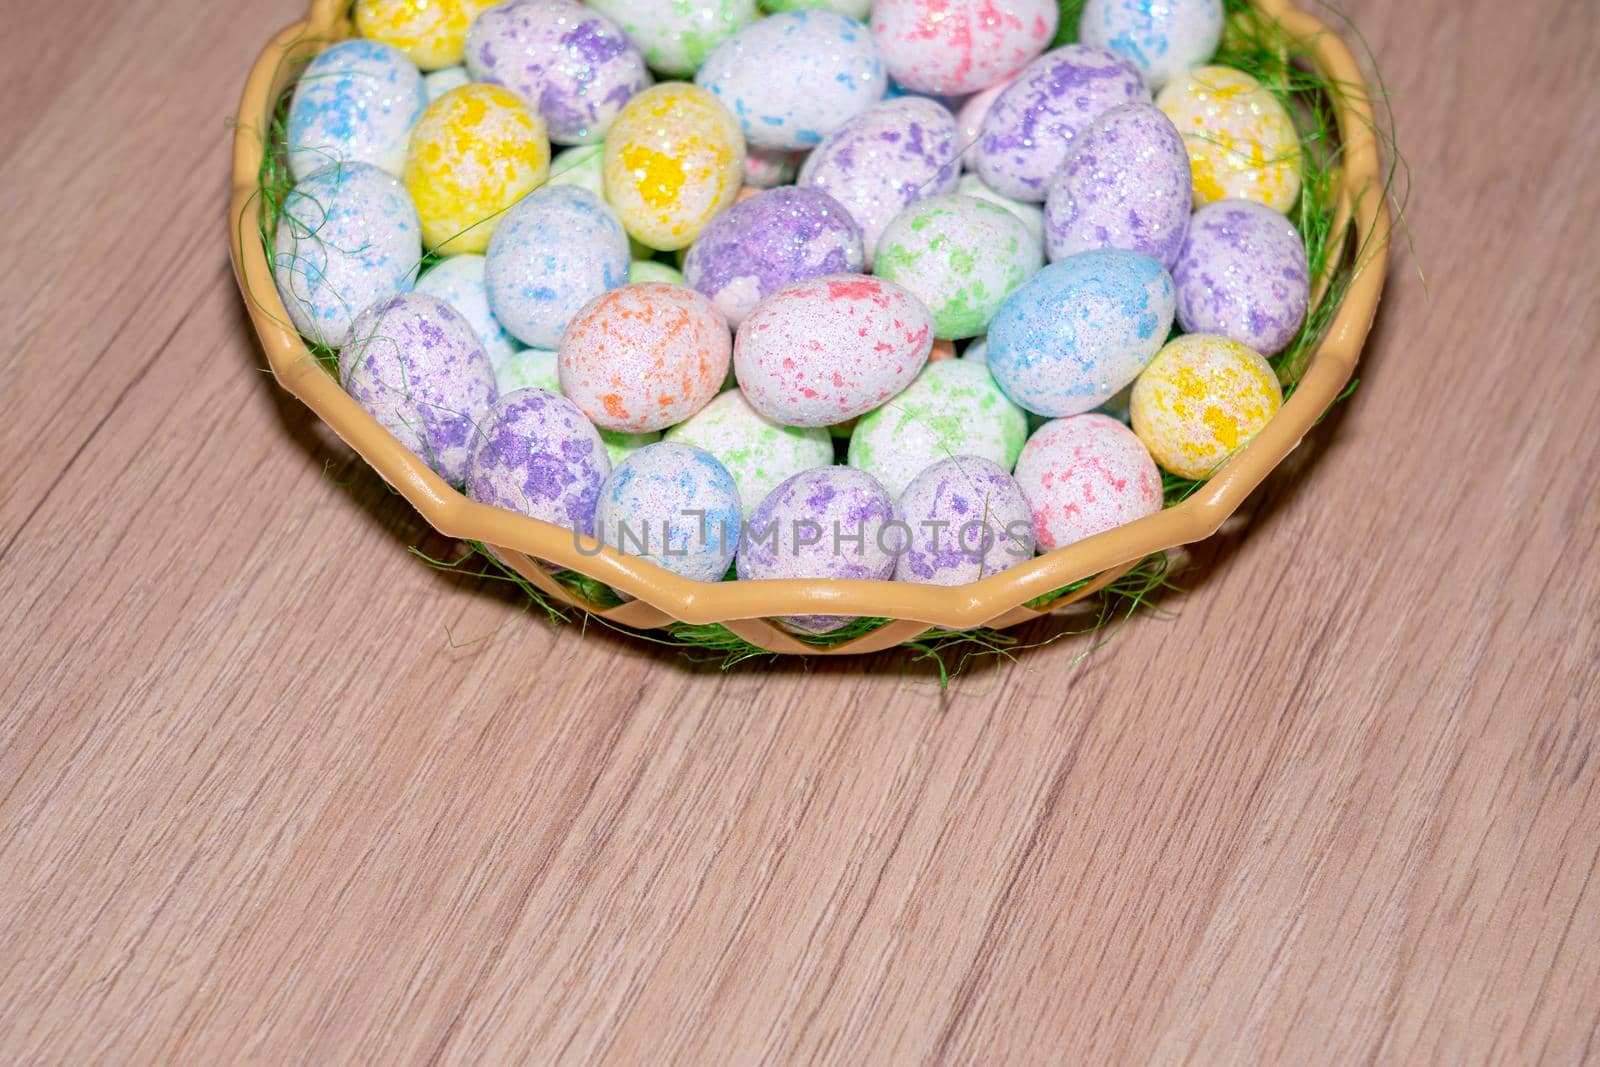 easter colorful eggs in a nest close up on a wooden background. High quality photo